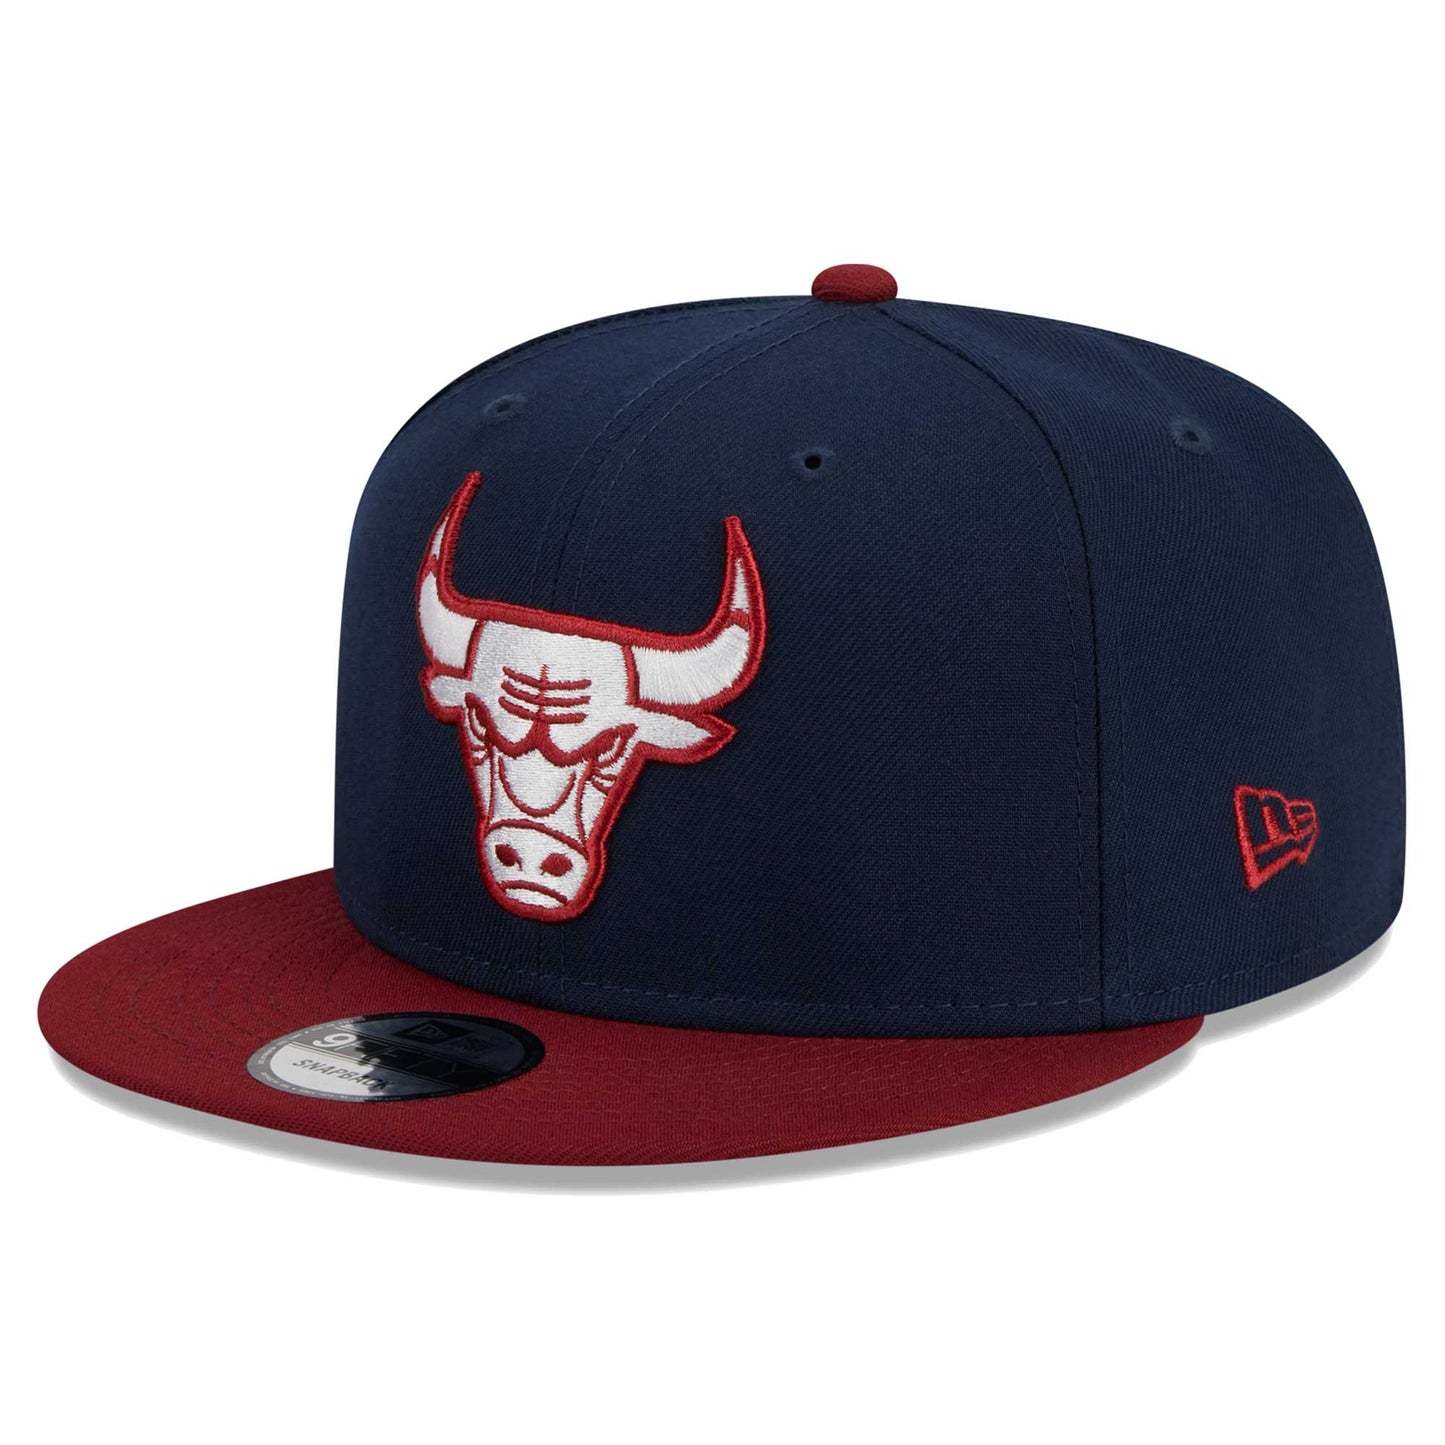 Chicago Bulls New Era Two-Tone Color Pack 9FIFTY Snapback Hat - Navy/Crimson